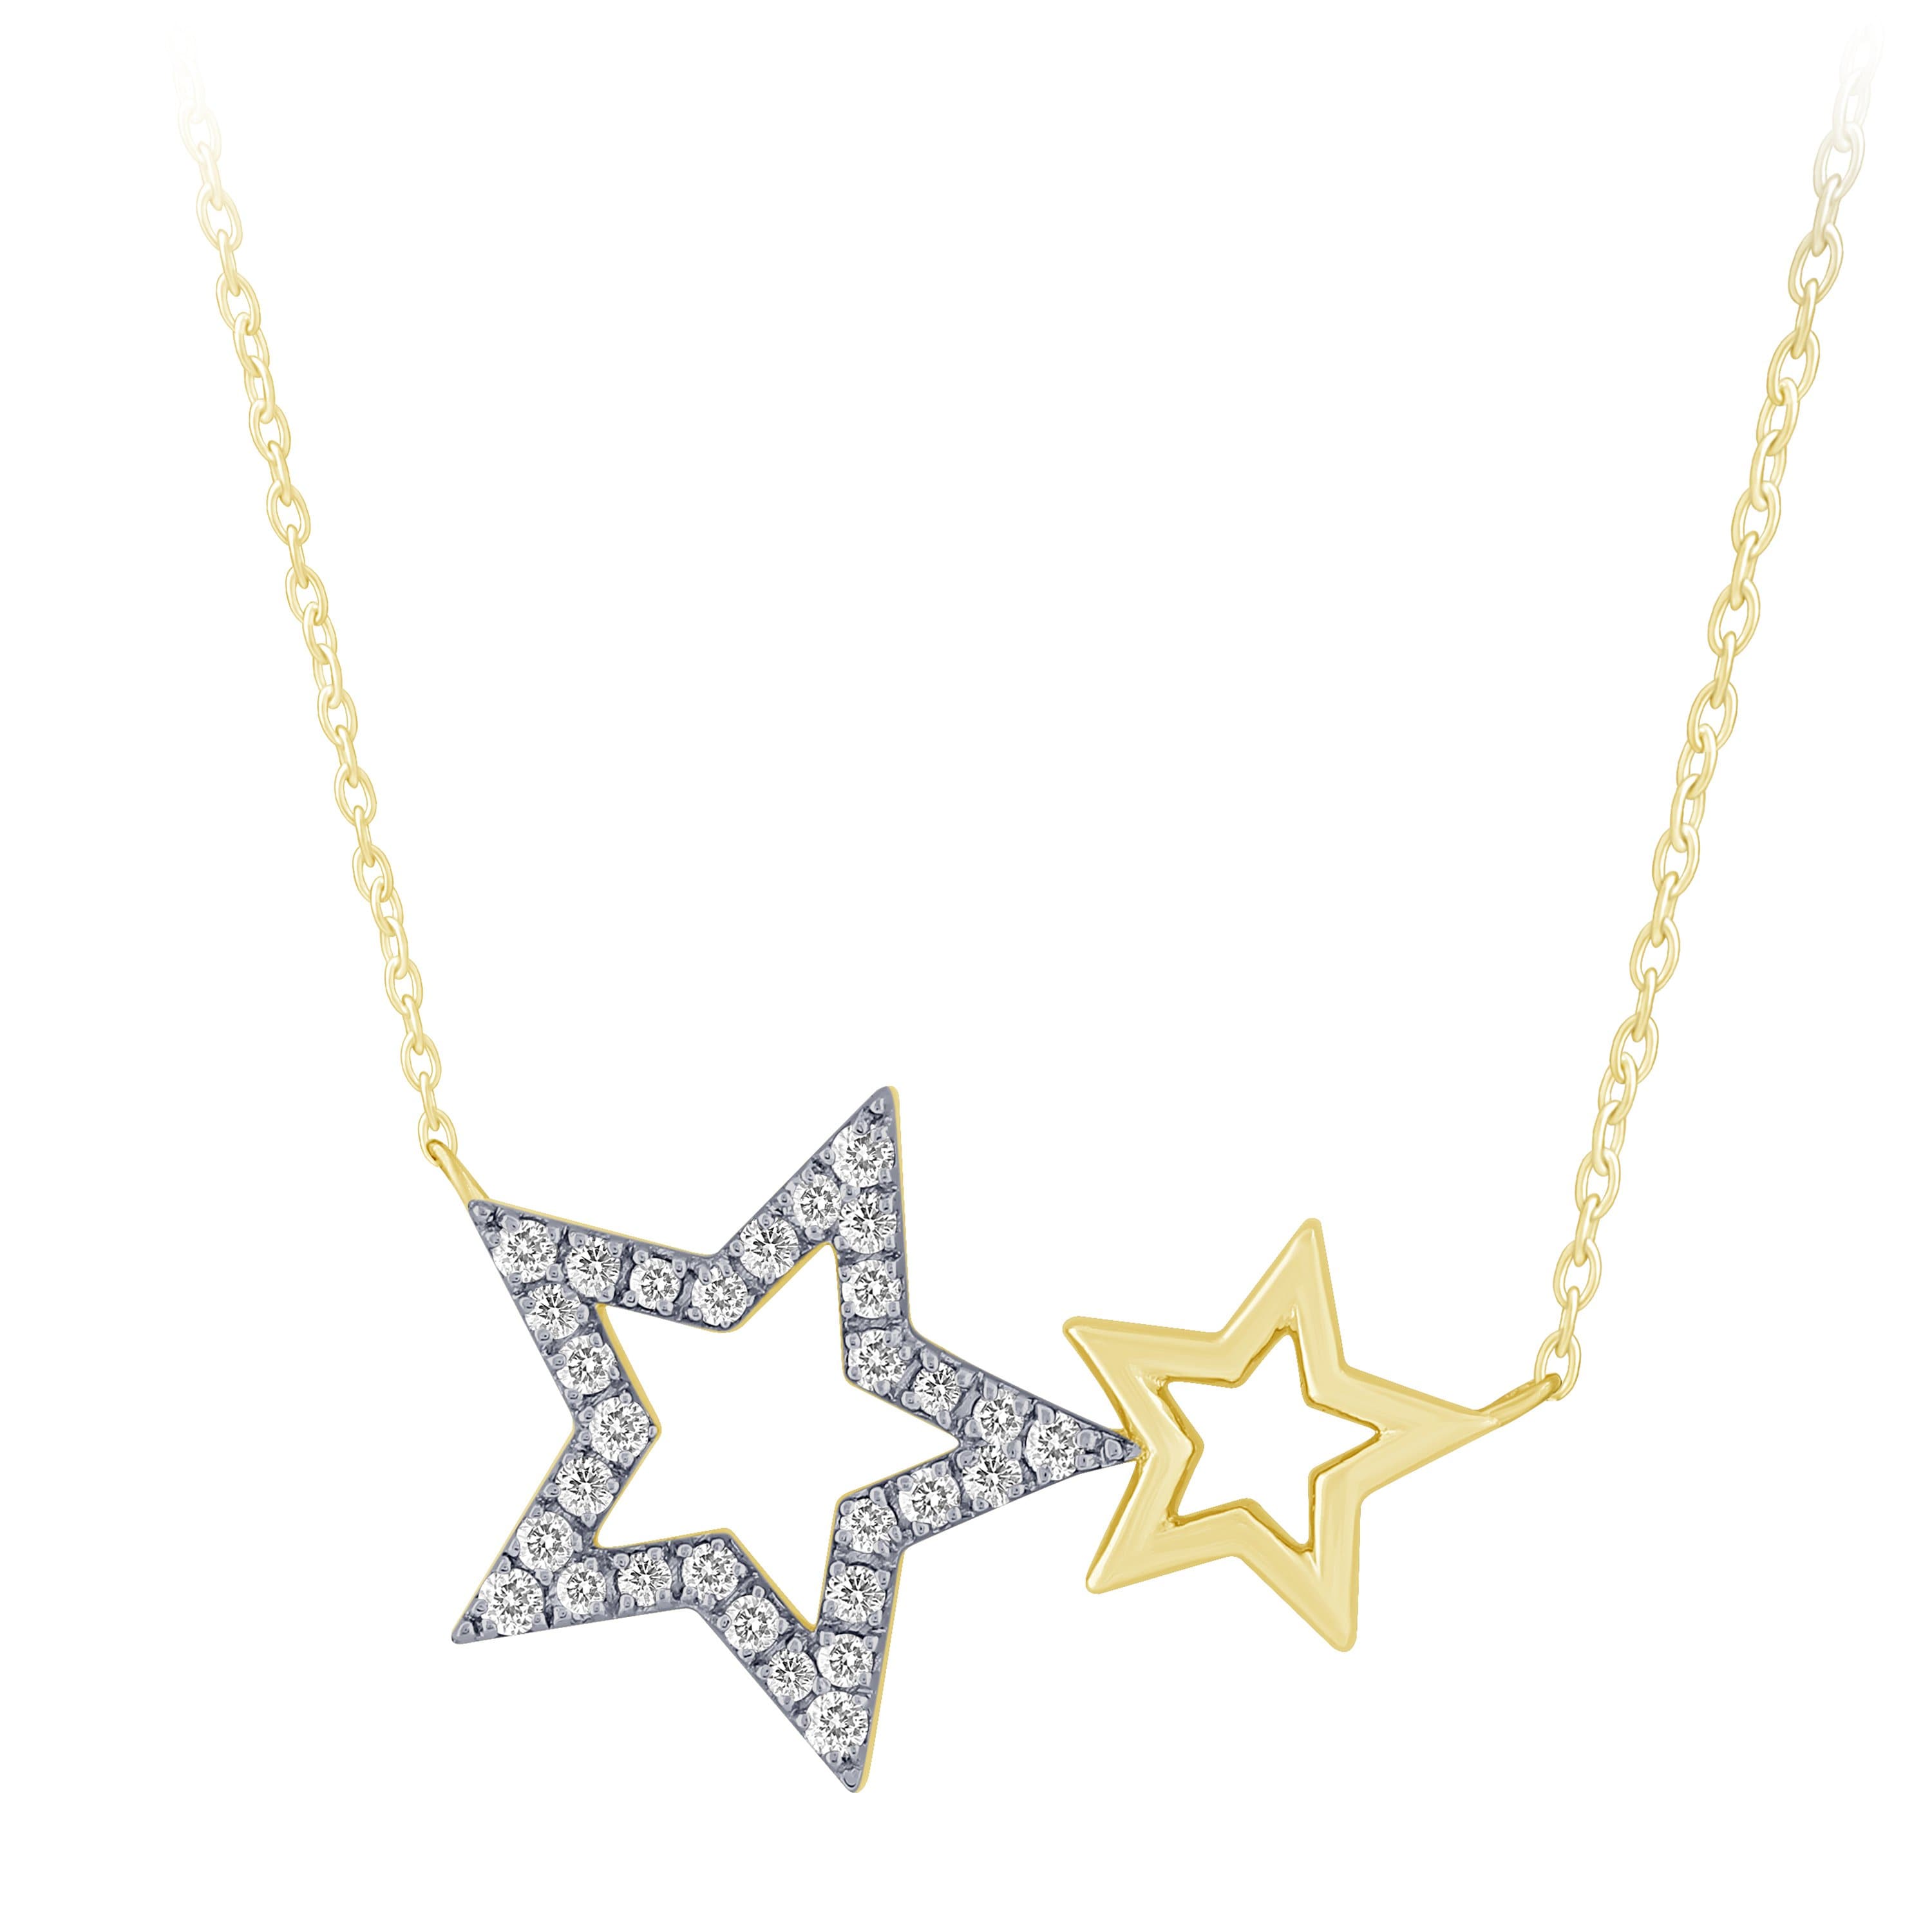 Buy Silver Plated chain With Triple Star Shape Solitaire Diamond Pendant  For Women at Amazon.in